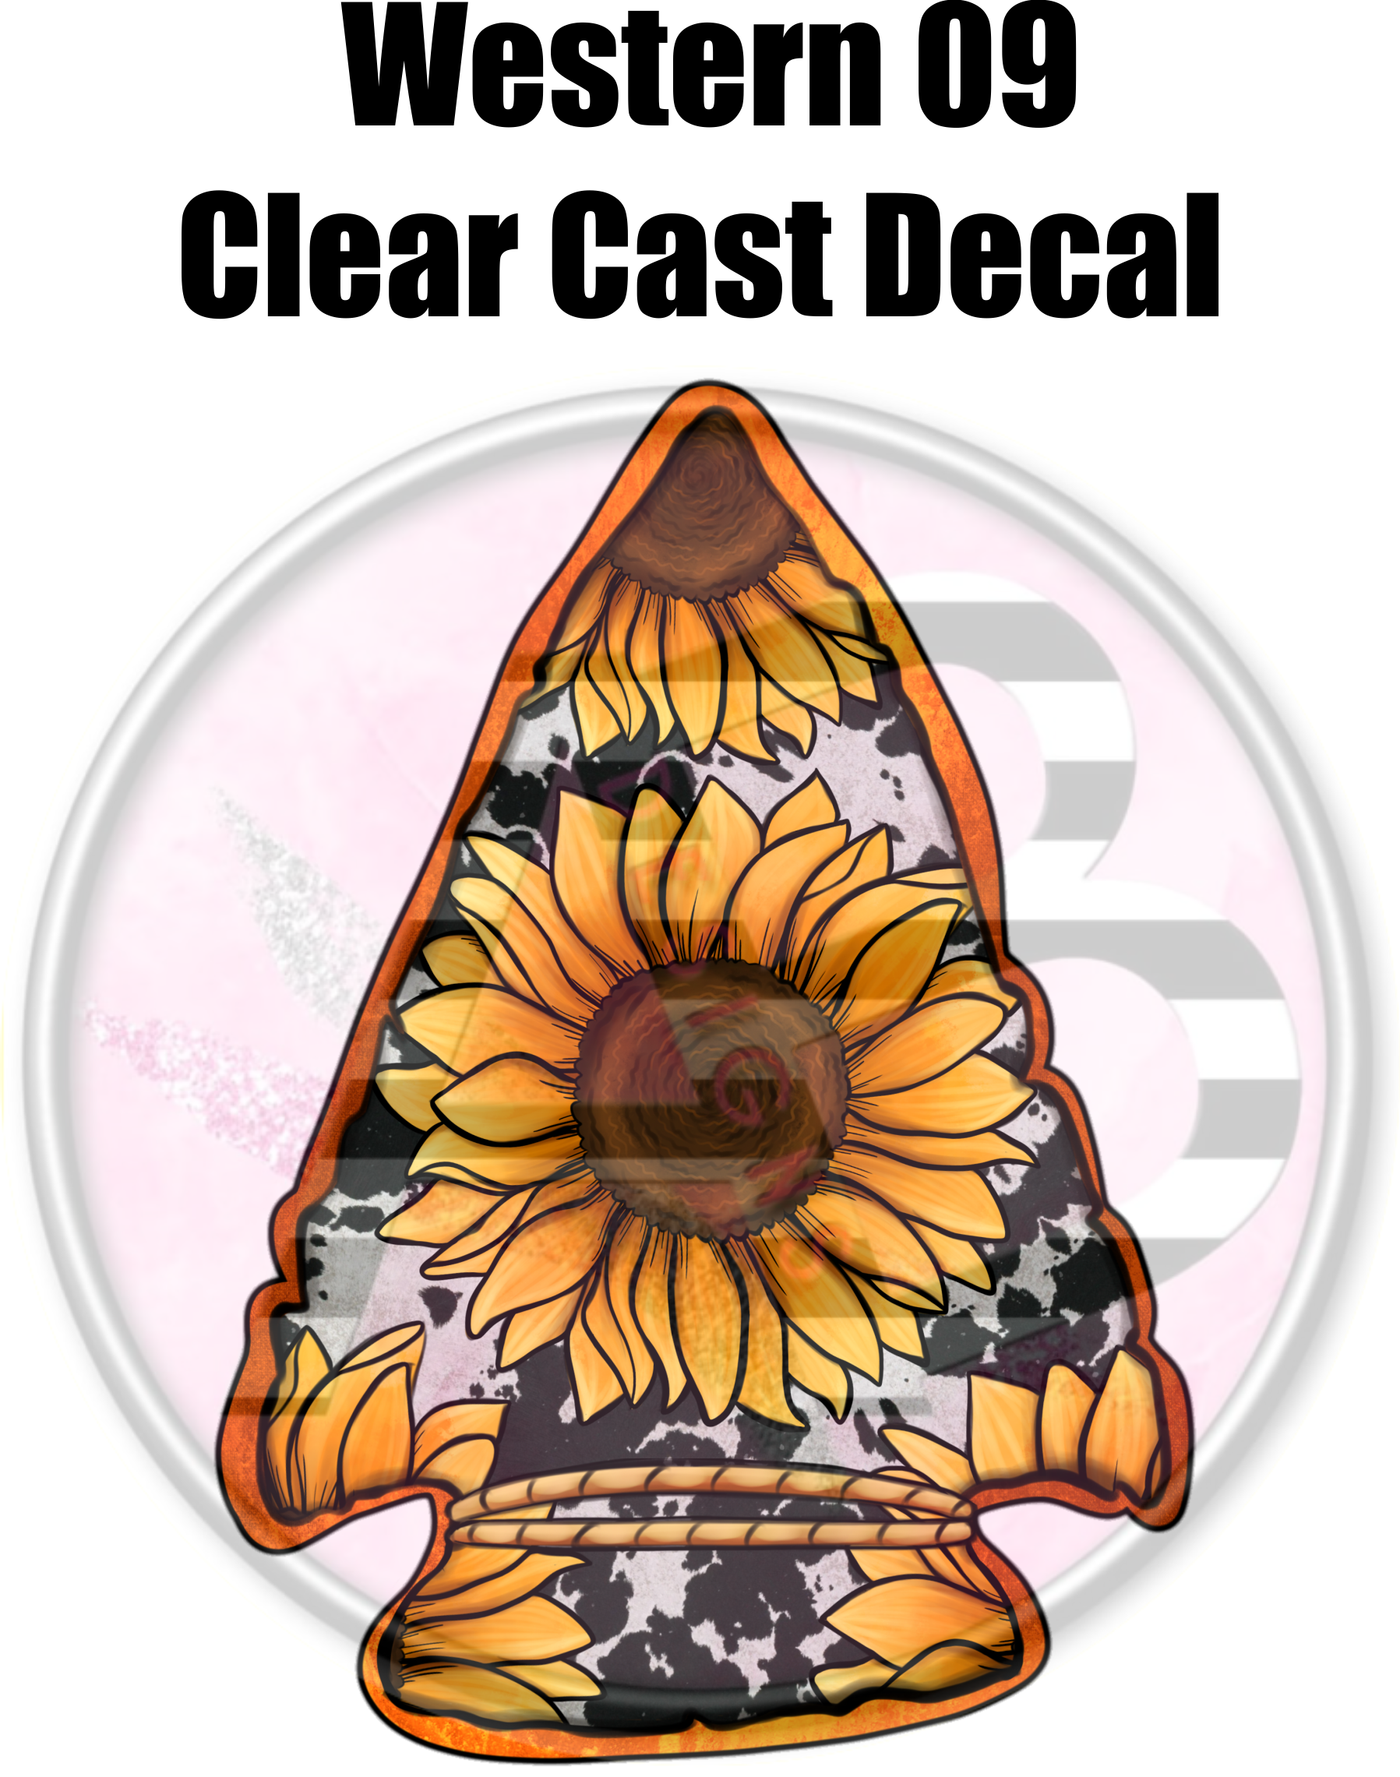 Western 09 - Clear Cast Decal